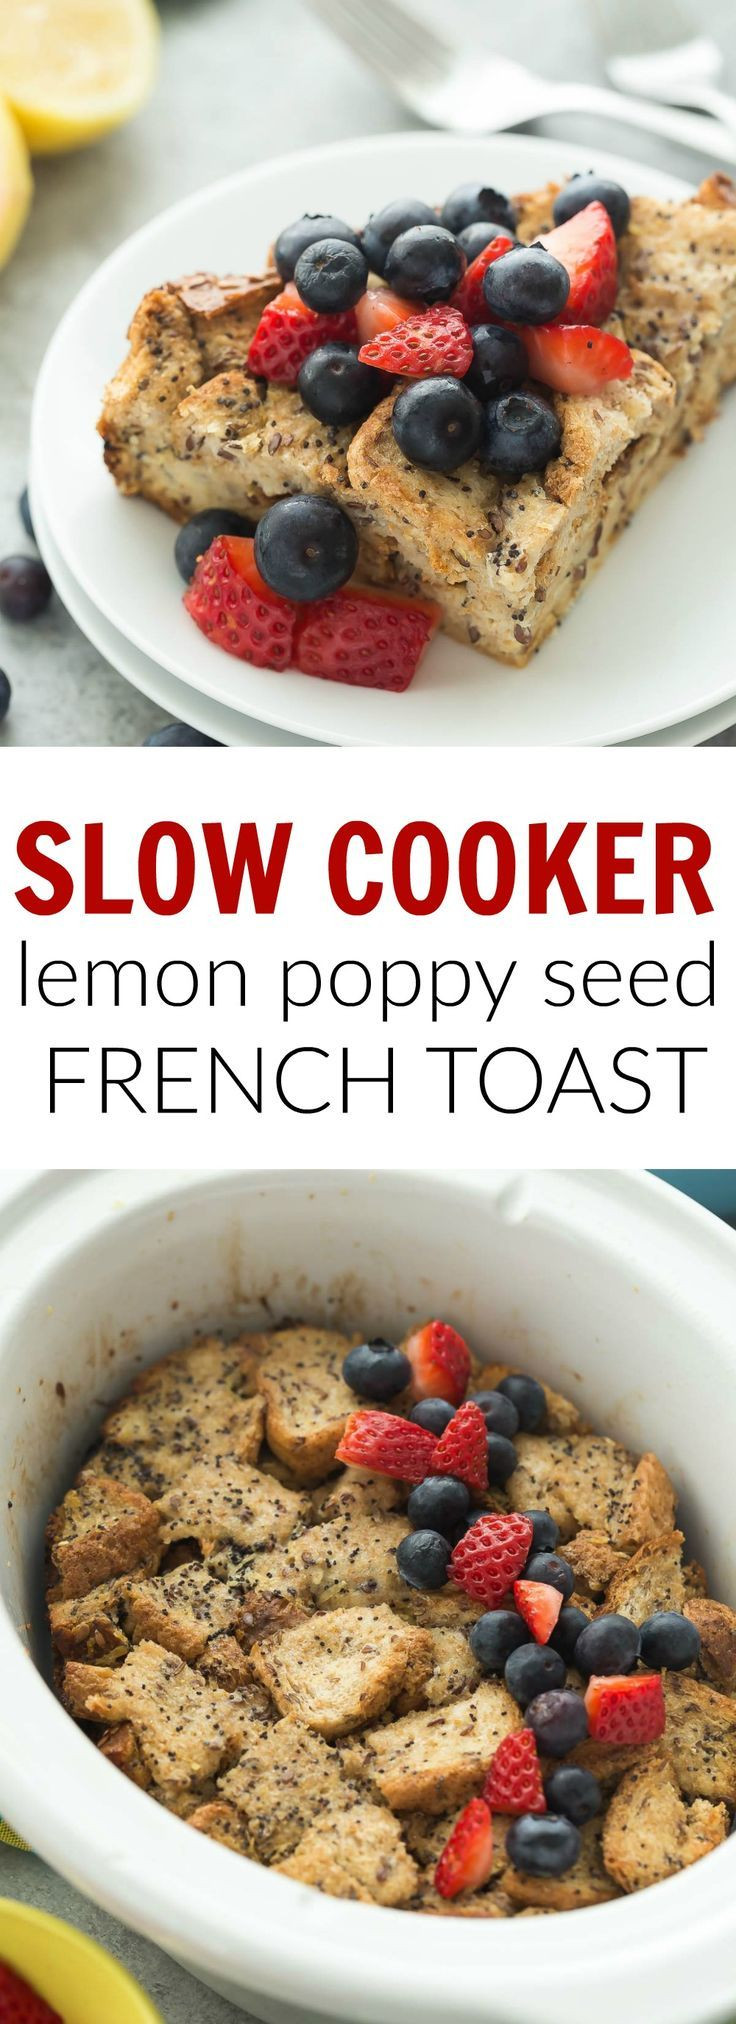 Slow Cooker French Toast Overnight
 This Overnight Slow Cooker Lemon Poppy Seed French Toast